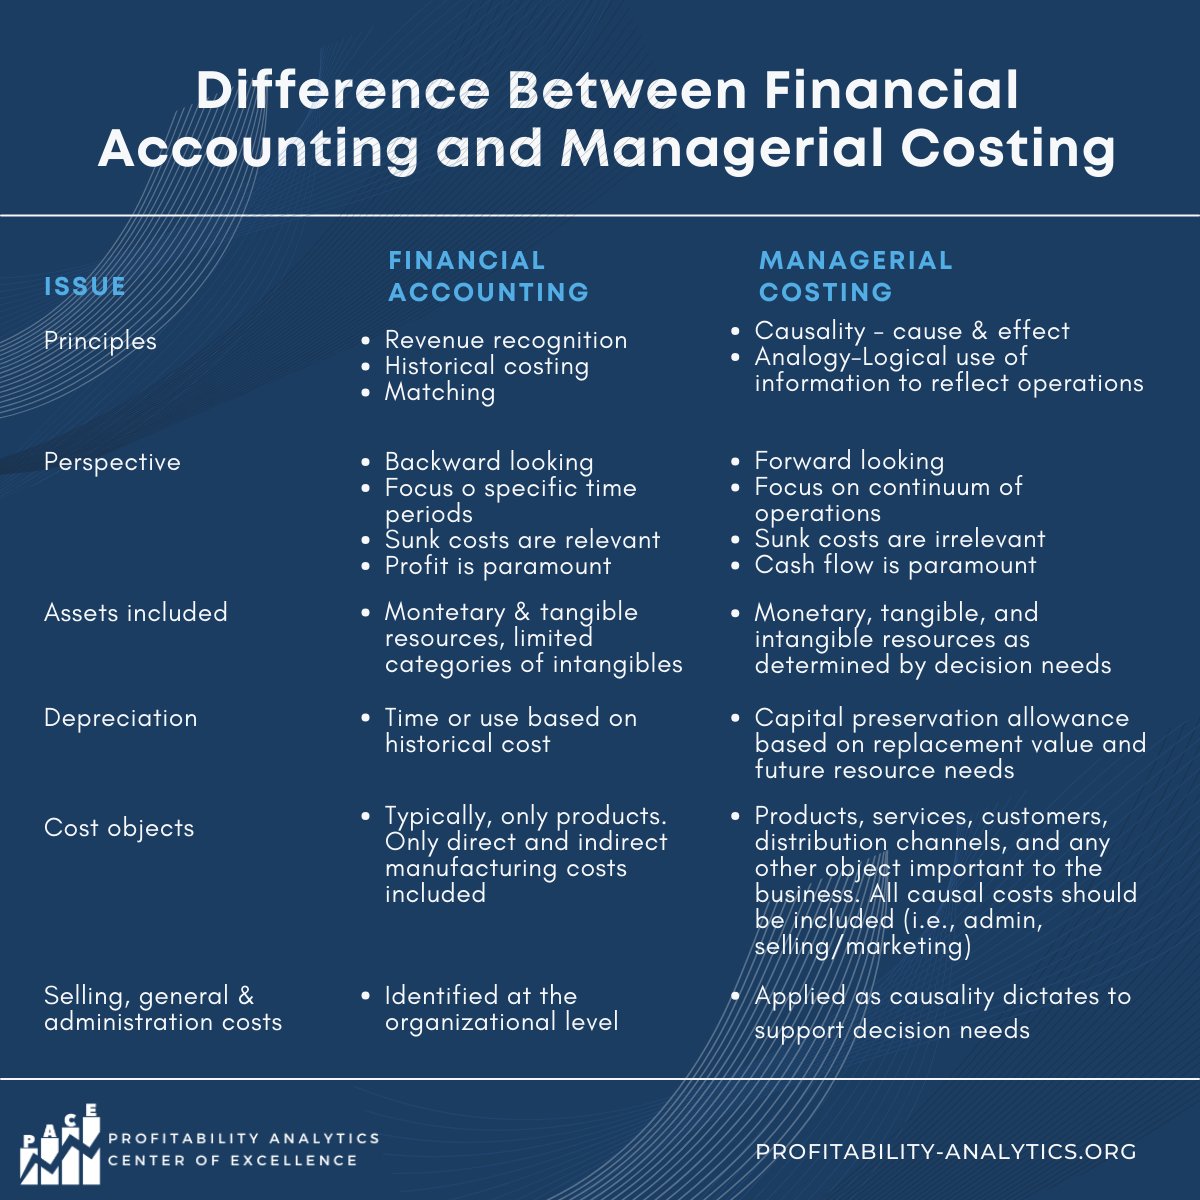 #Financialaccounting models are not designed or intended for internal management decisions. This table is from our #ebook  on 'Managerial Costing: Why it's important and how to do it'. tinyurl.com/3t9mwbej @TandF_AccForum @MinneapolisIMA